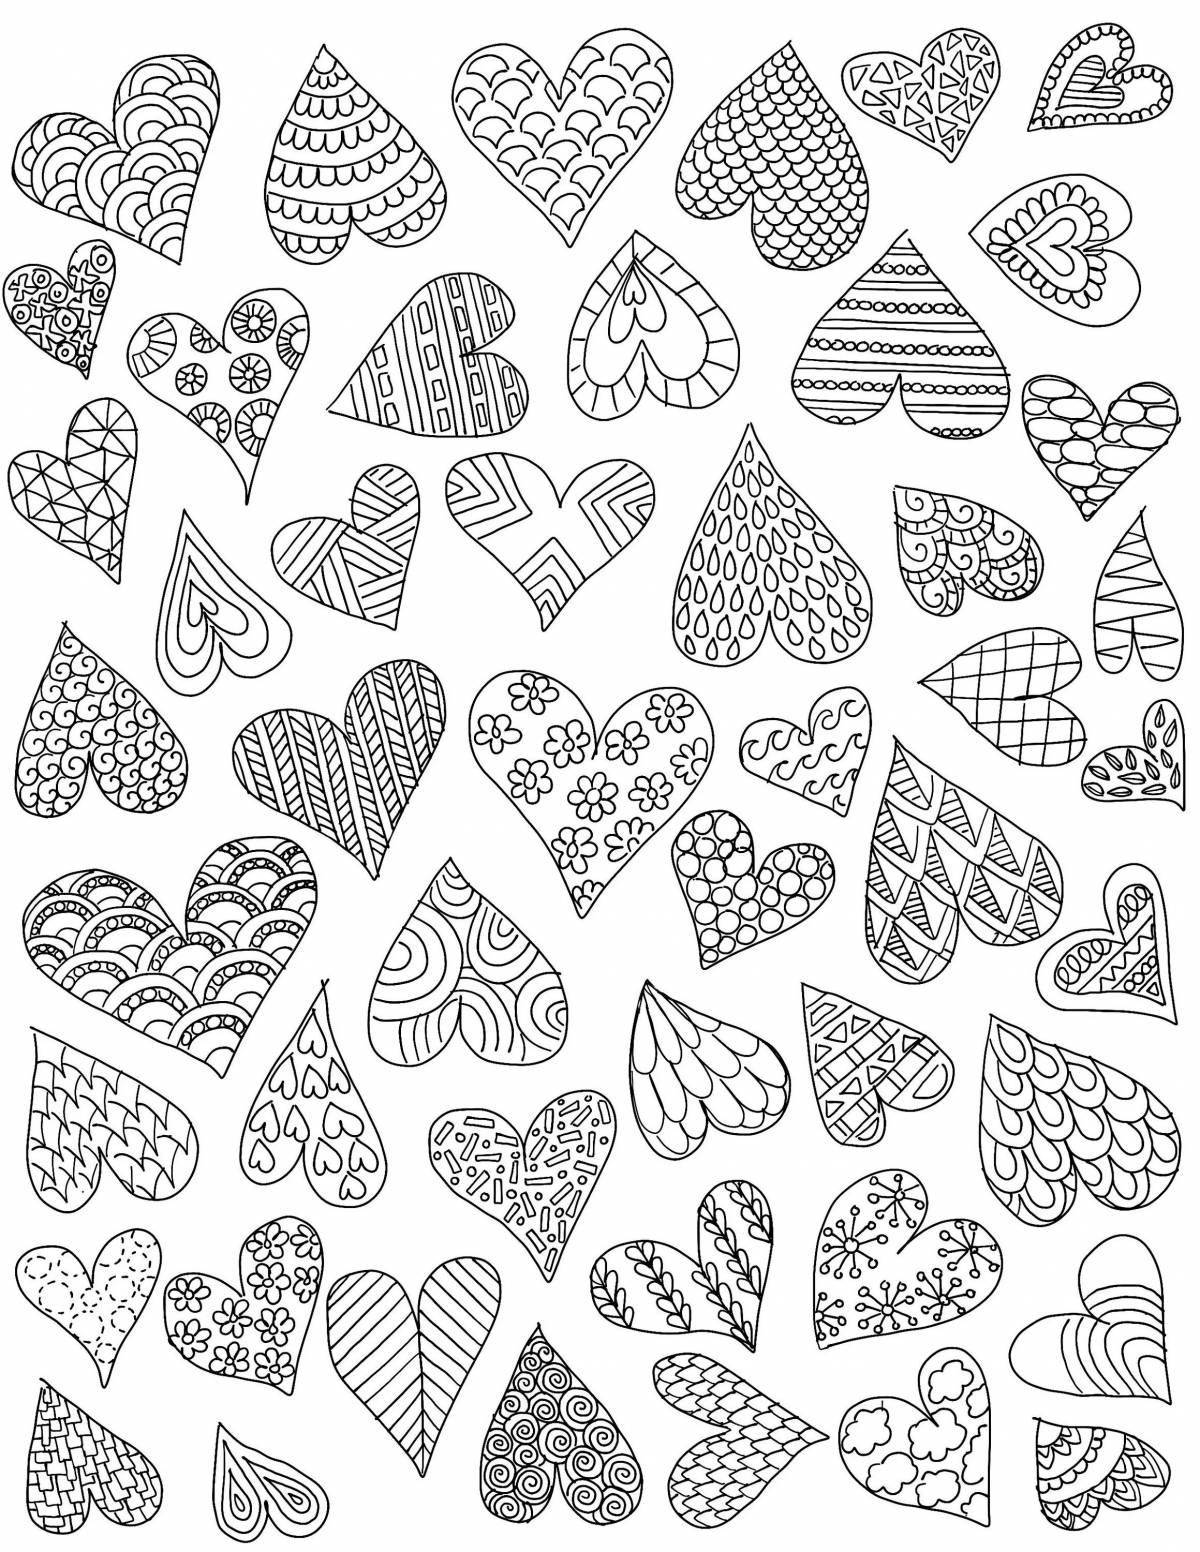 Animated heart coloring page